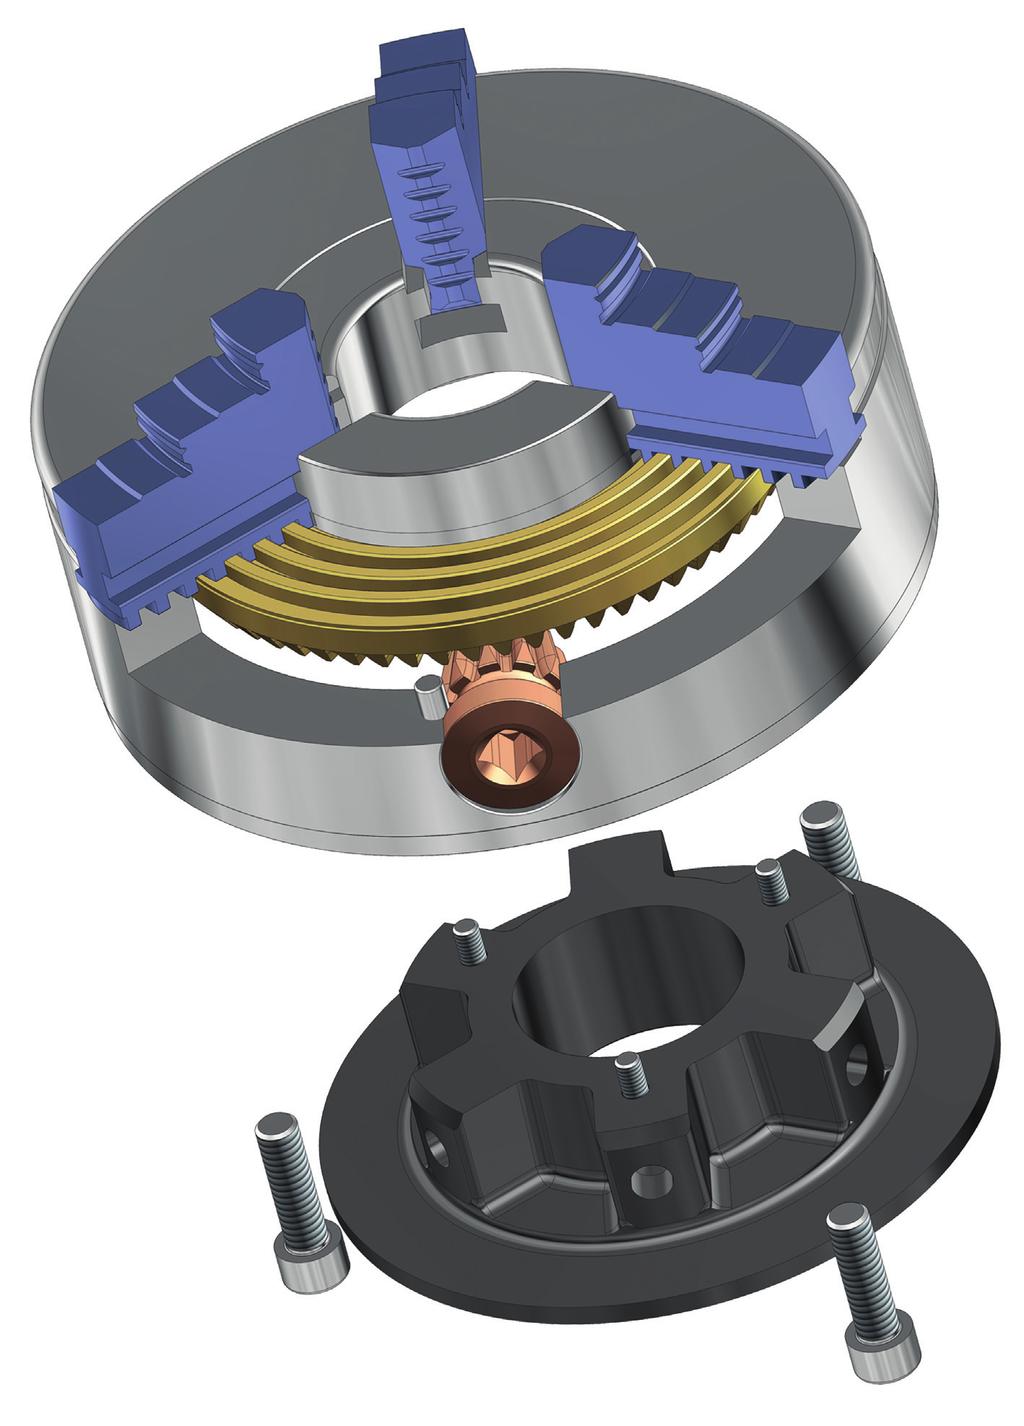 A control edge on the chuck body enables a quick and simple adjustment of the spiral ring chuck on the machine and the new security adapter allows a defined torque with a torque wrench, especially